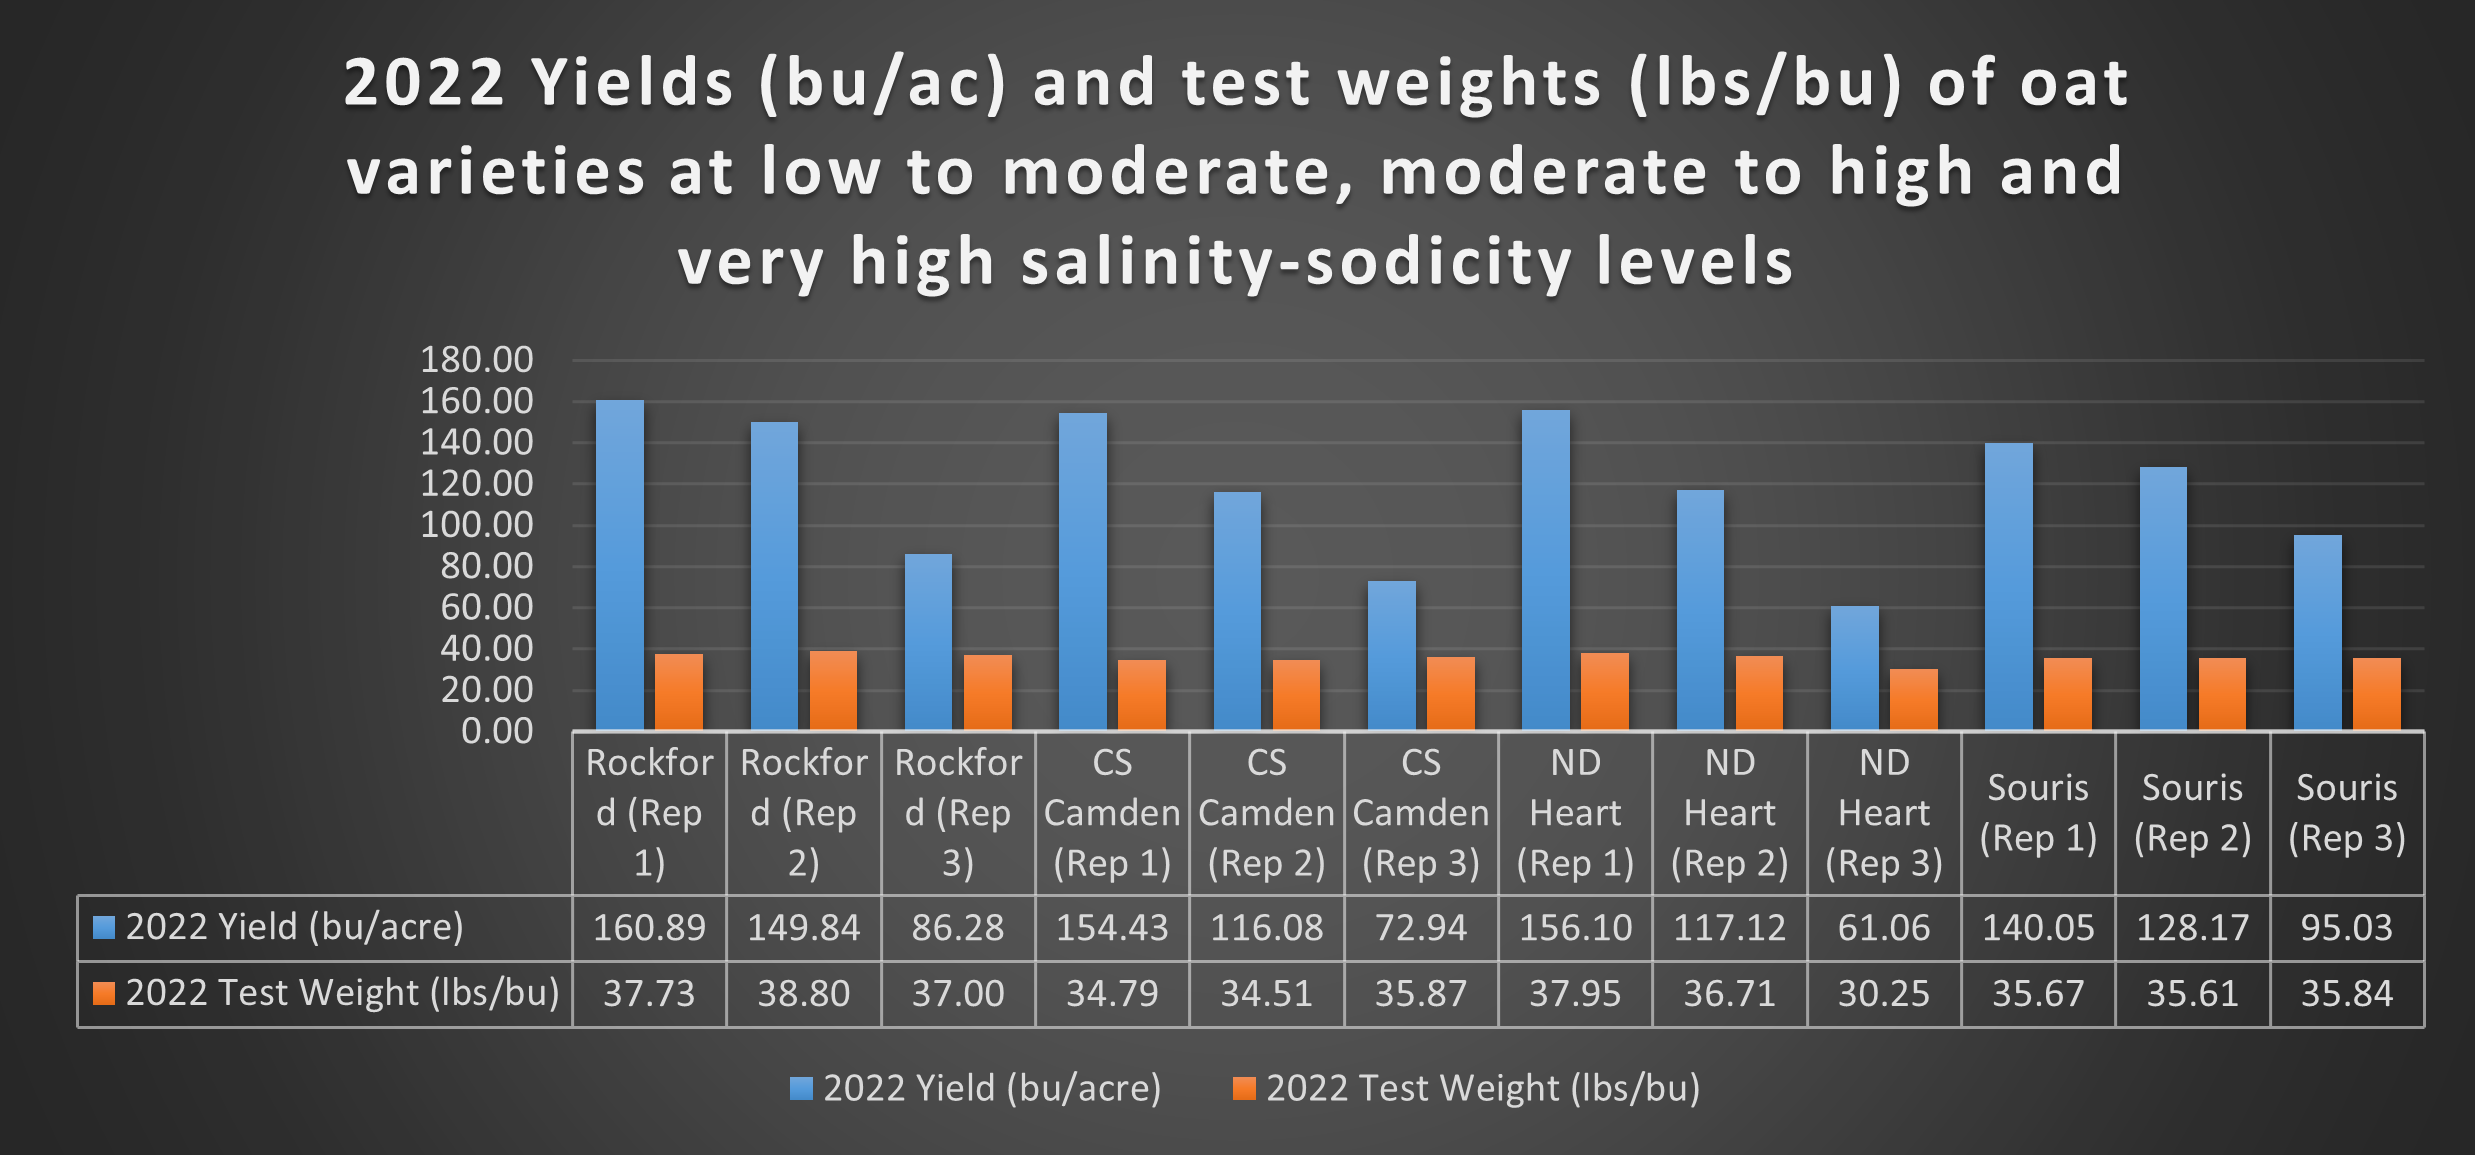  2022 yields (bushels/acre) and test weights (lbs./bushel) of the four oat varieties for replications 1, 2 and 3.